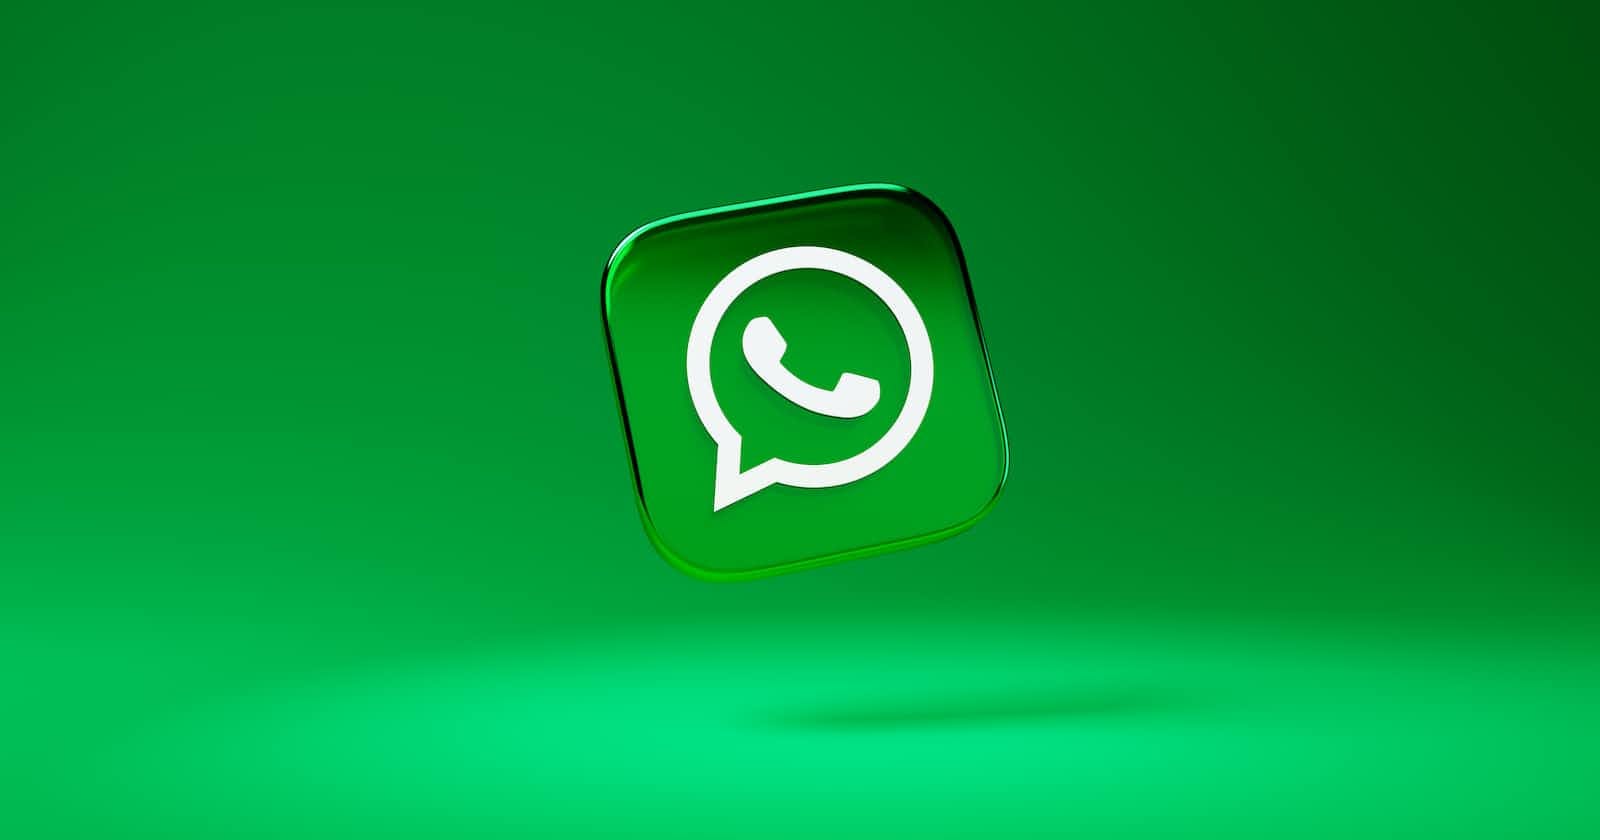 How To Download And Install Whatsapp On Your Computer In Just A Few Clicks